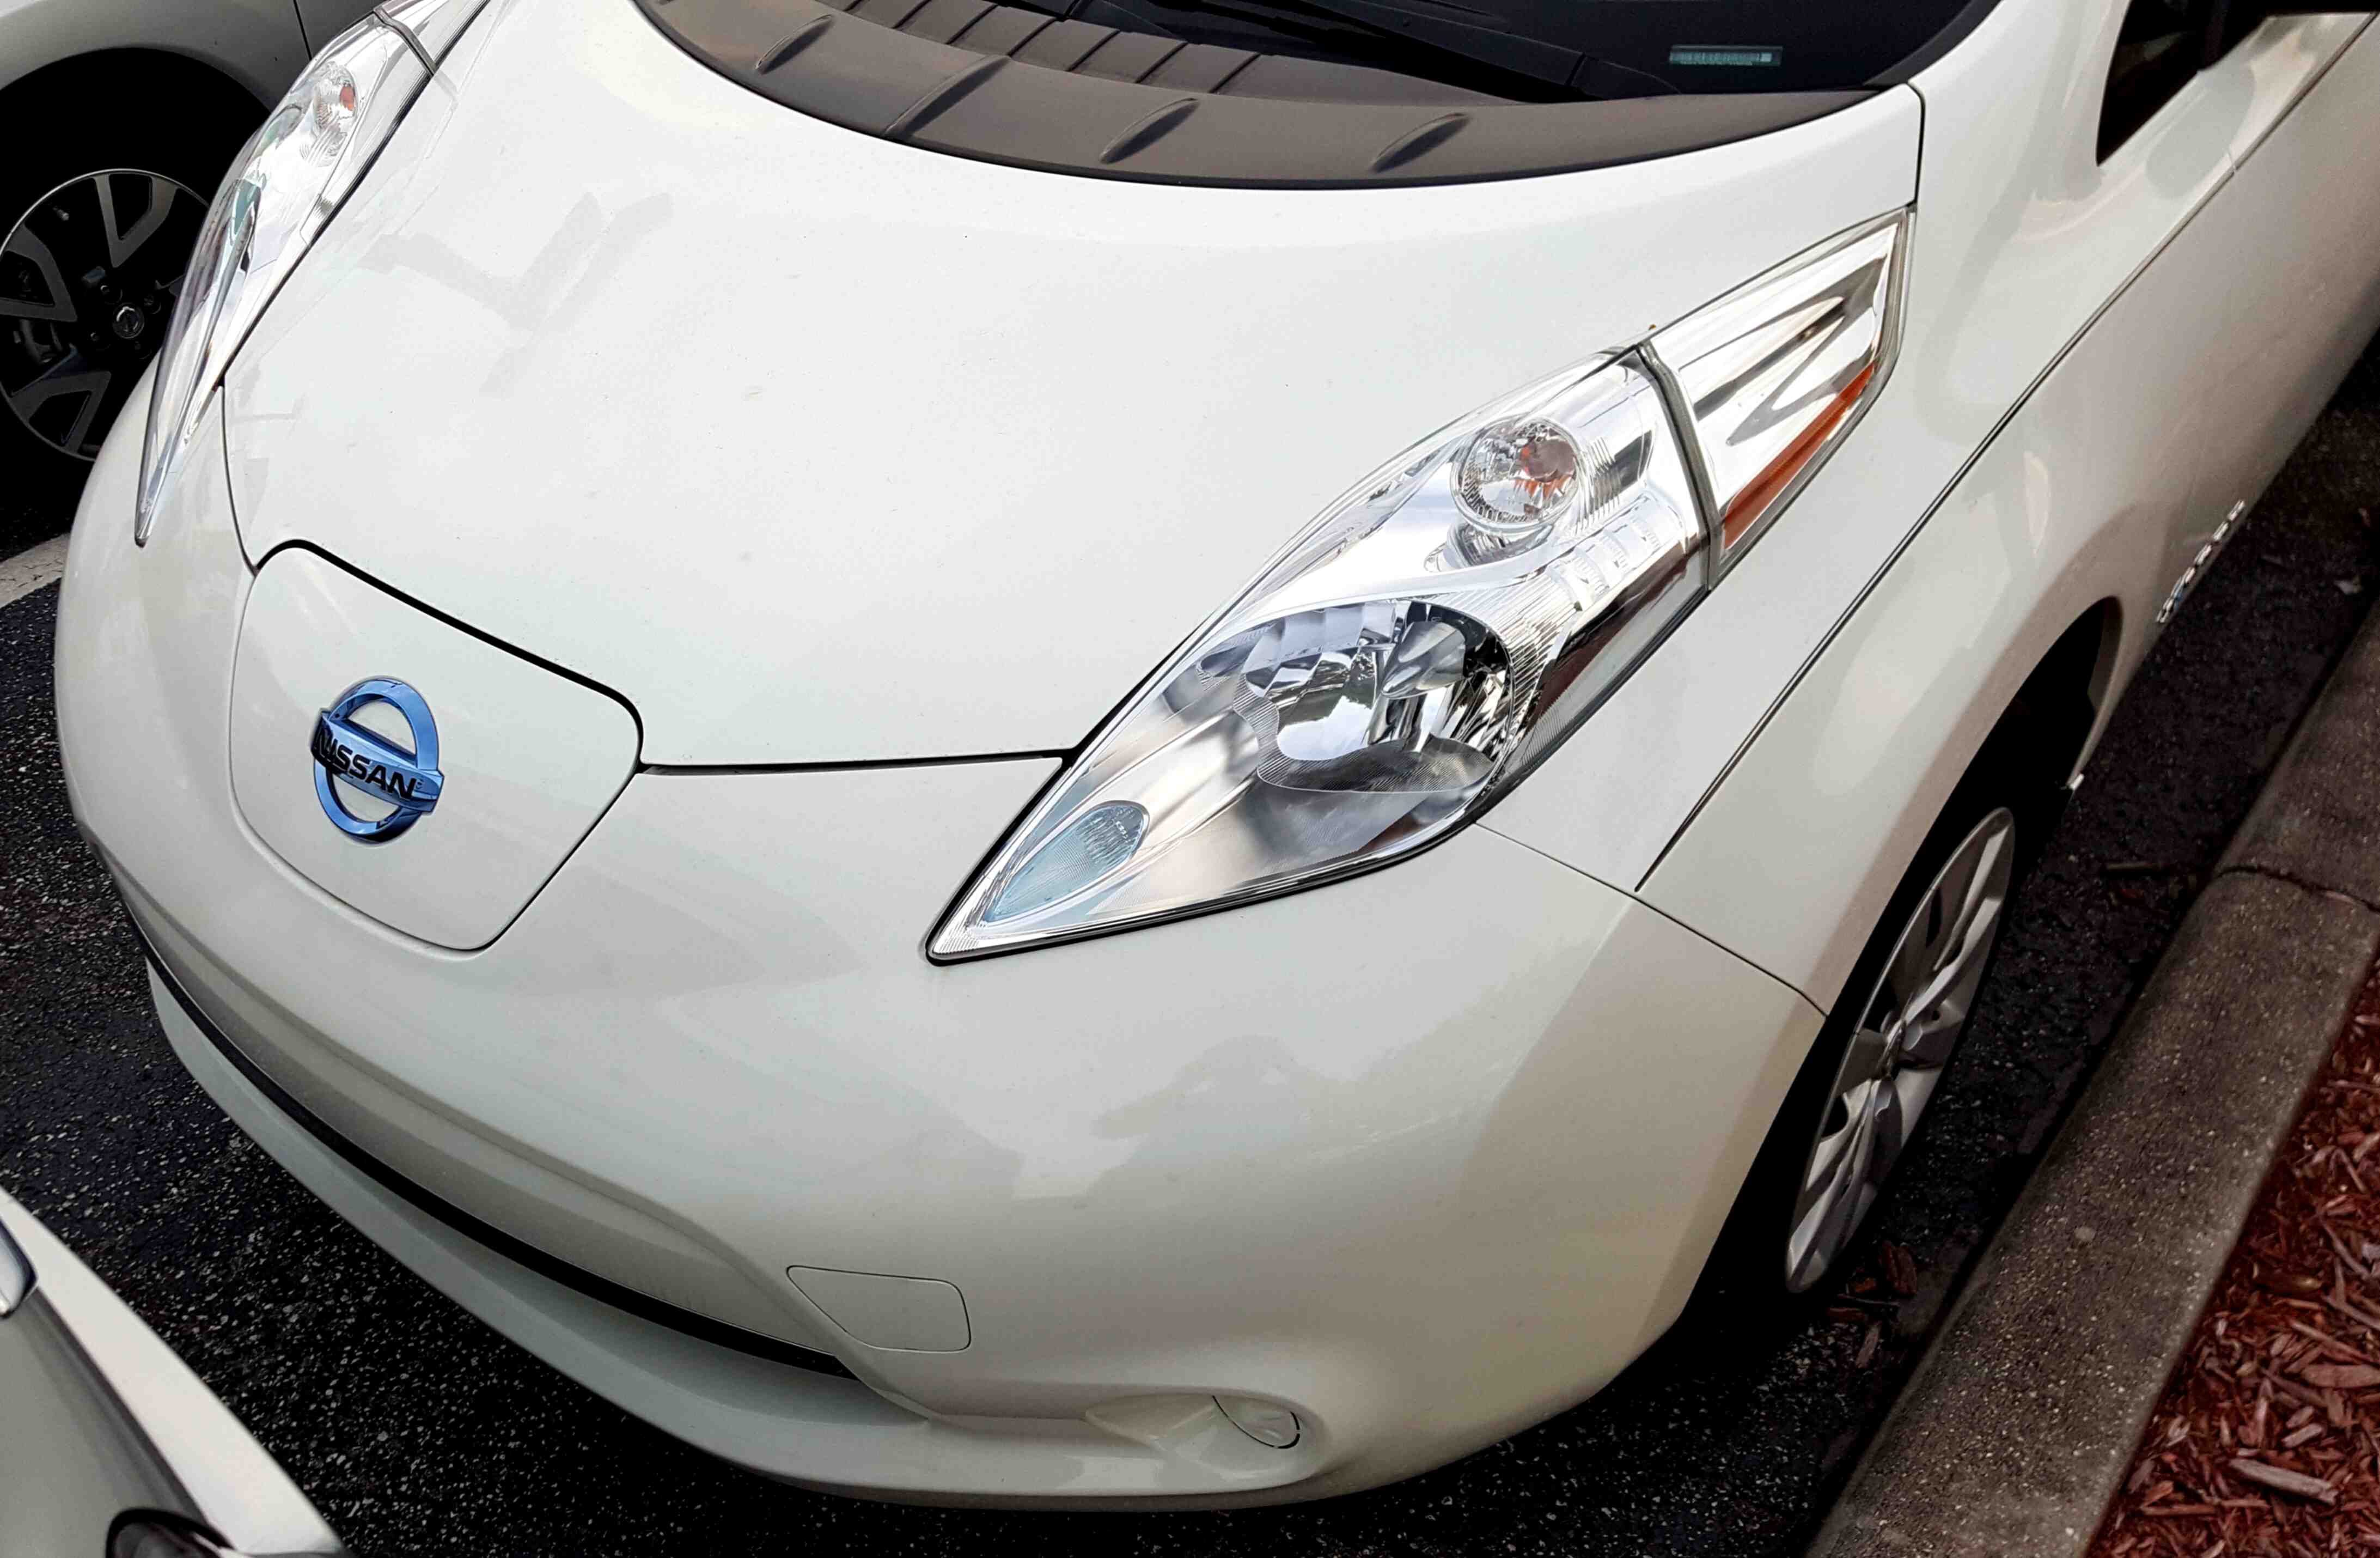 A front view of an arctic white 2015 Nissan Leaf.